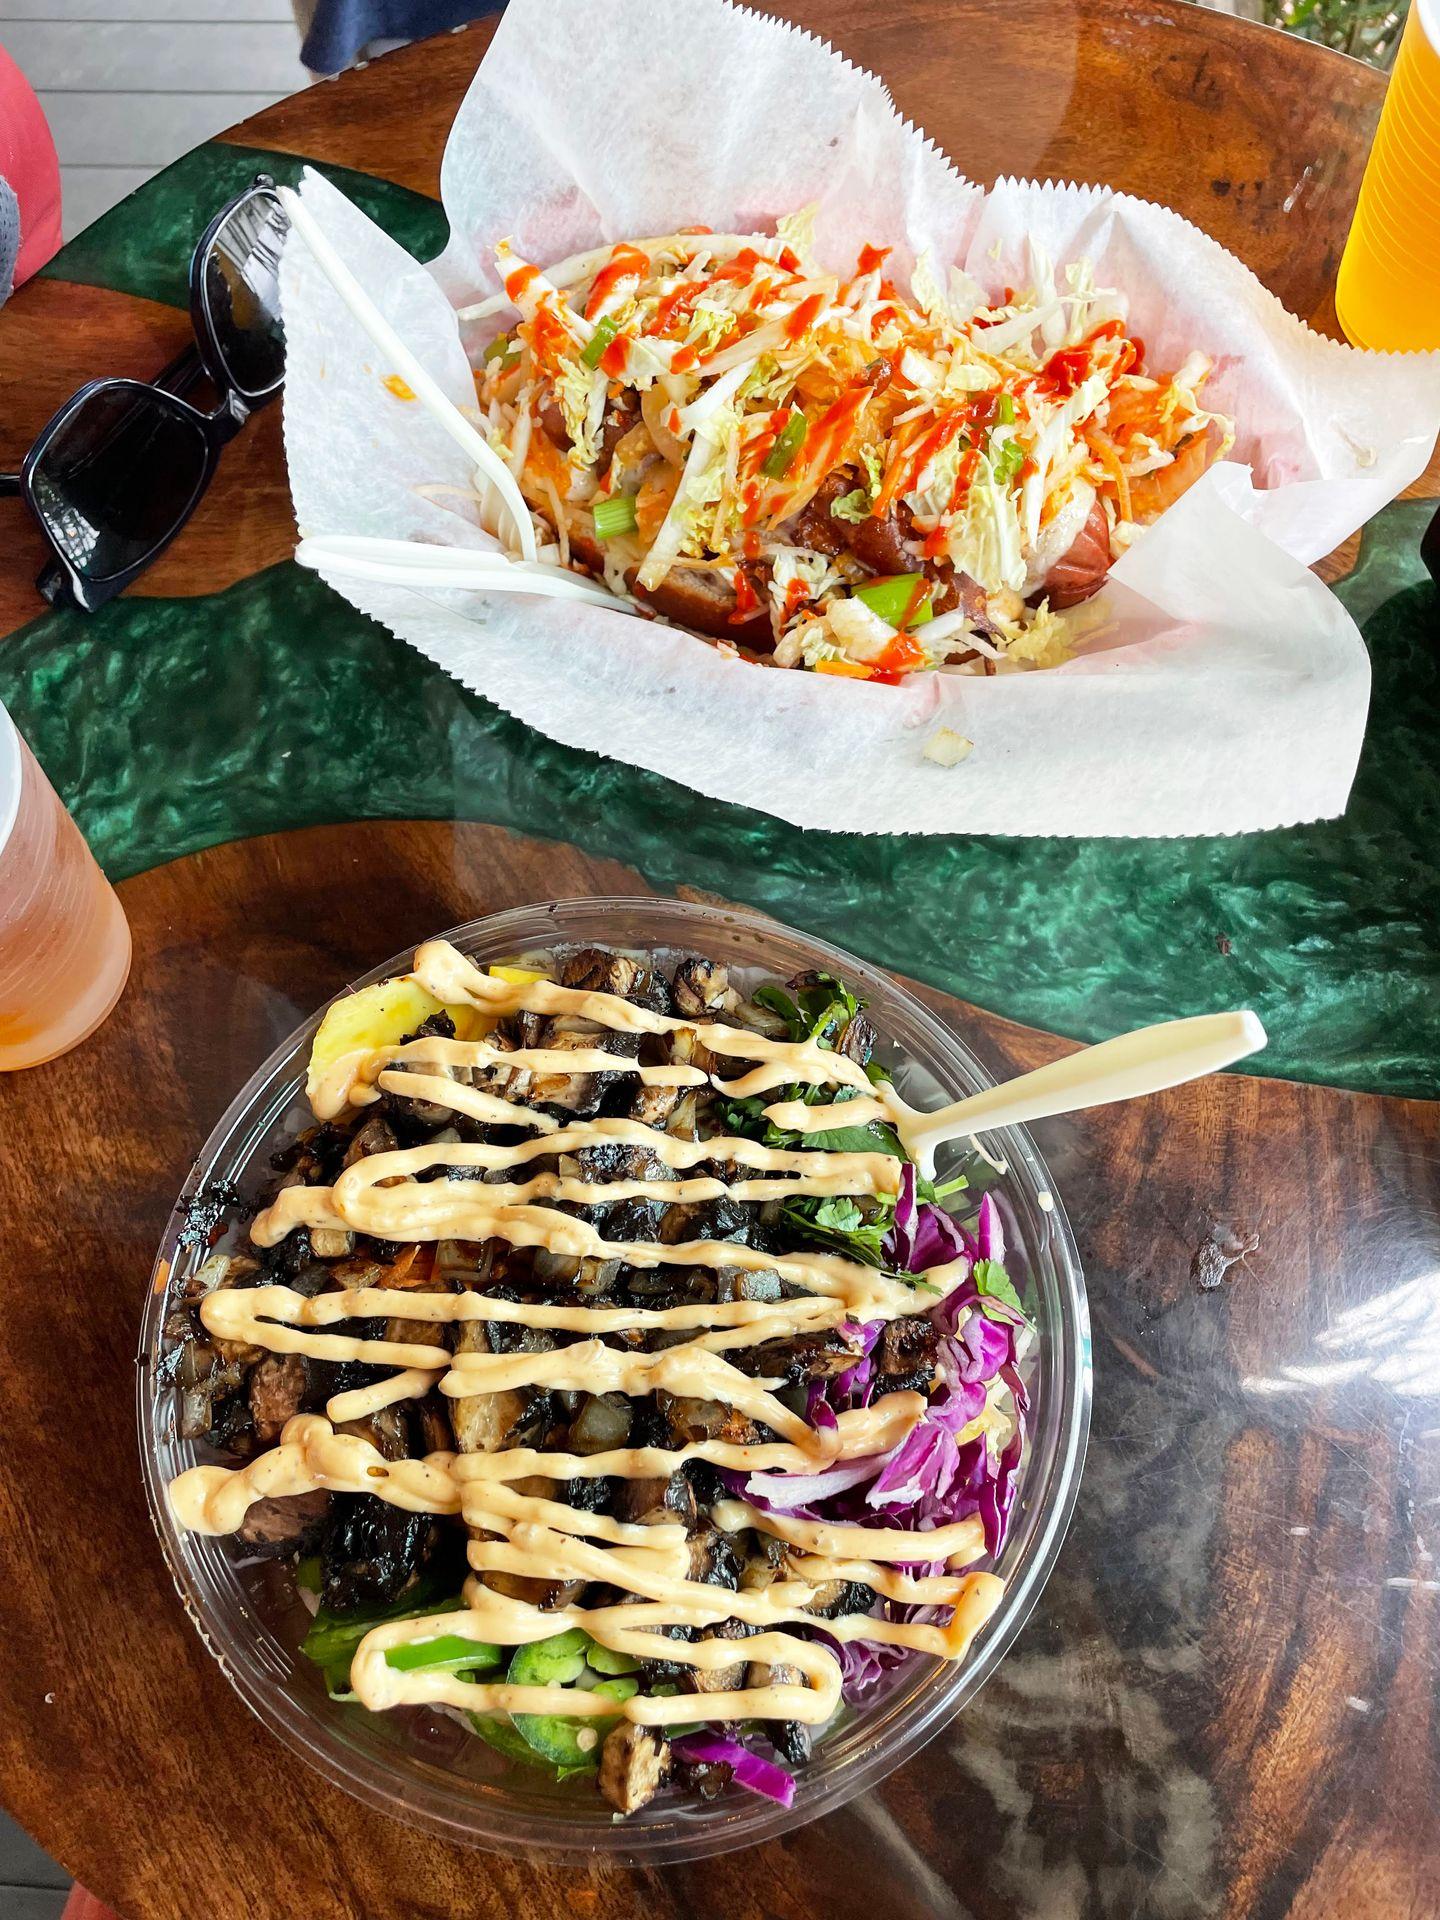 A hot dog and a poke bowl from Garbos